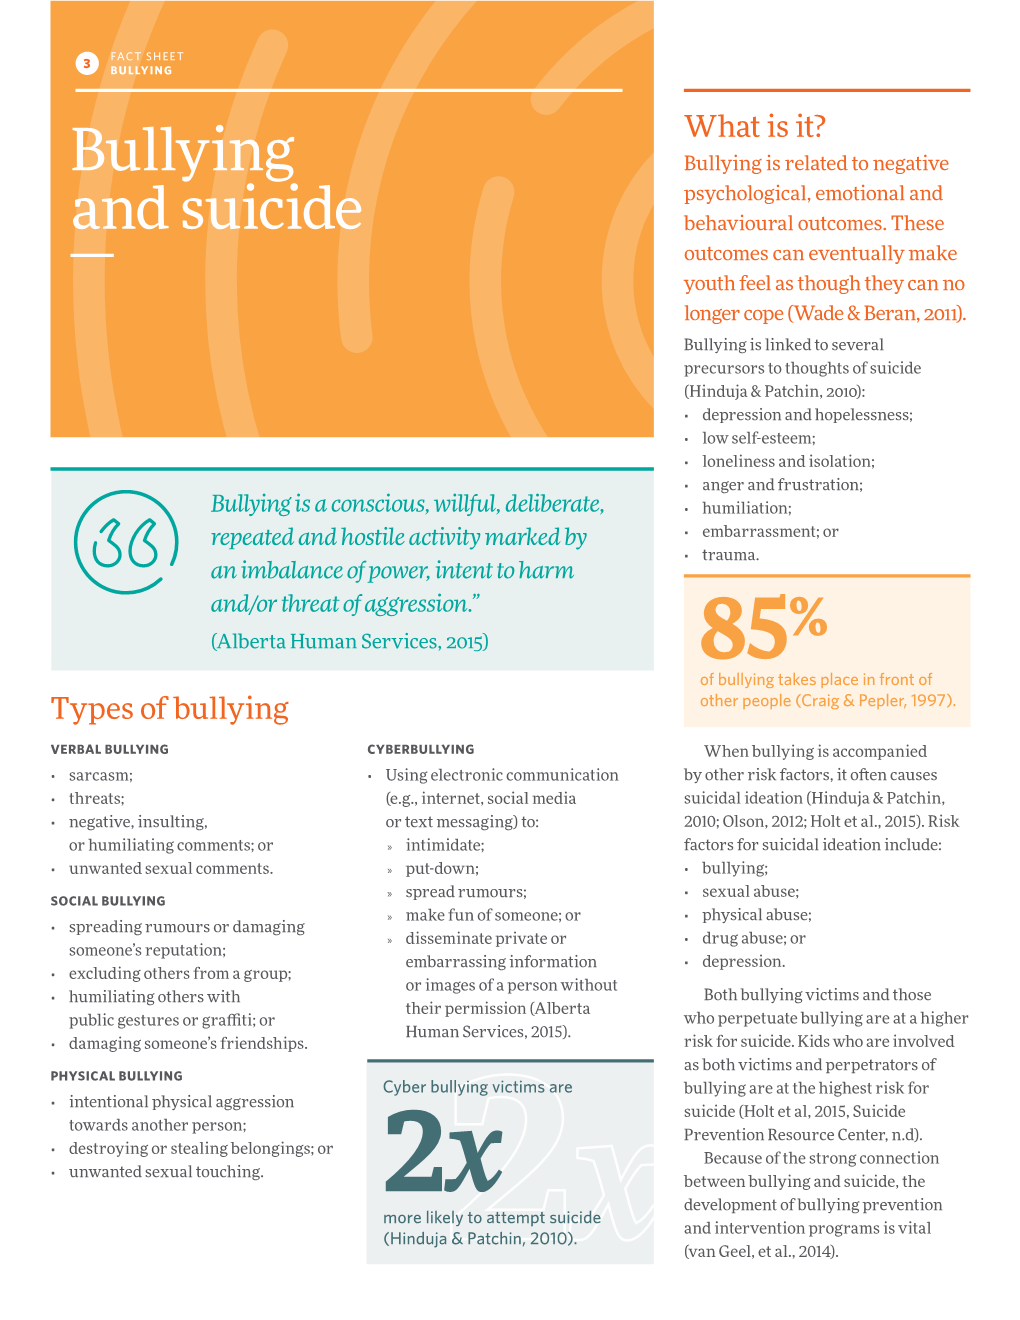 Bullying and Suicide, the 2X Development of Bullying Prevention More Likely to Attempt Suicide and Intervention Programs Is Vital (Hinduja & Patchin, 2010)